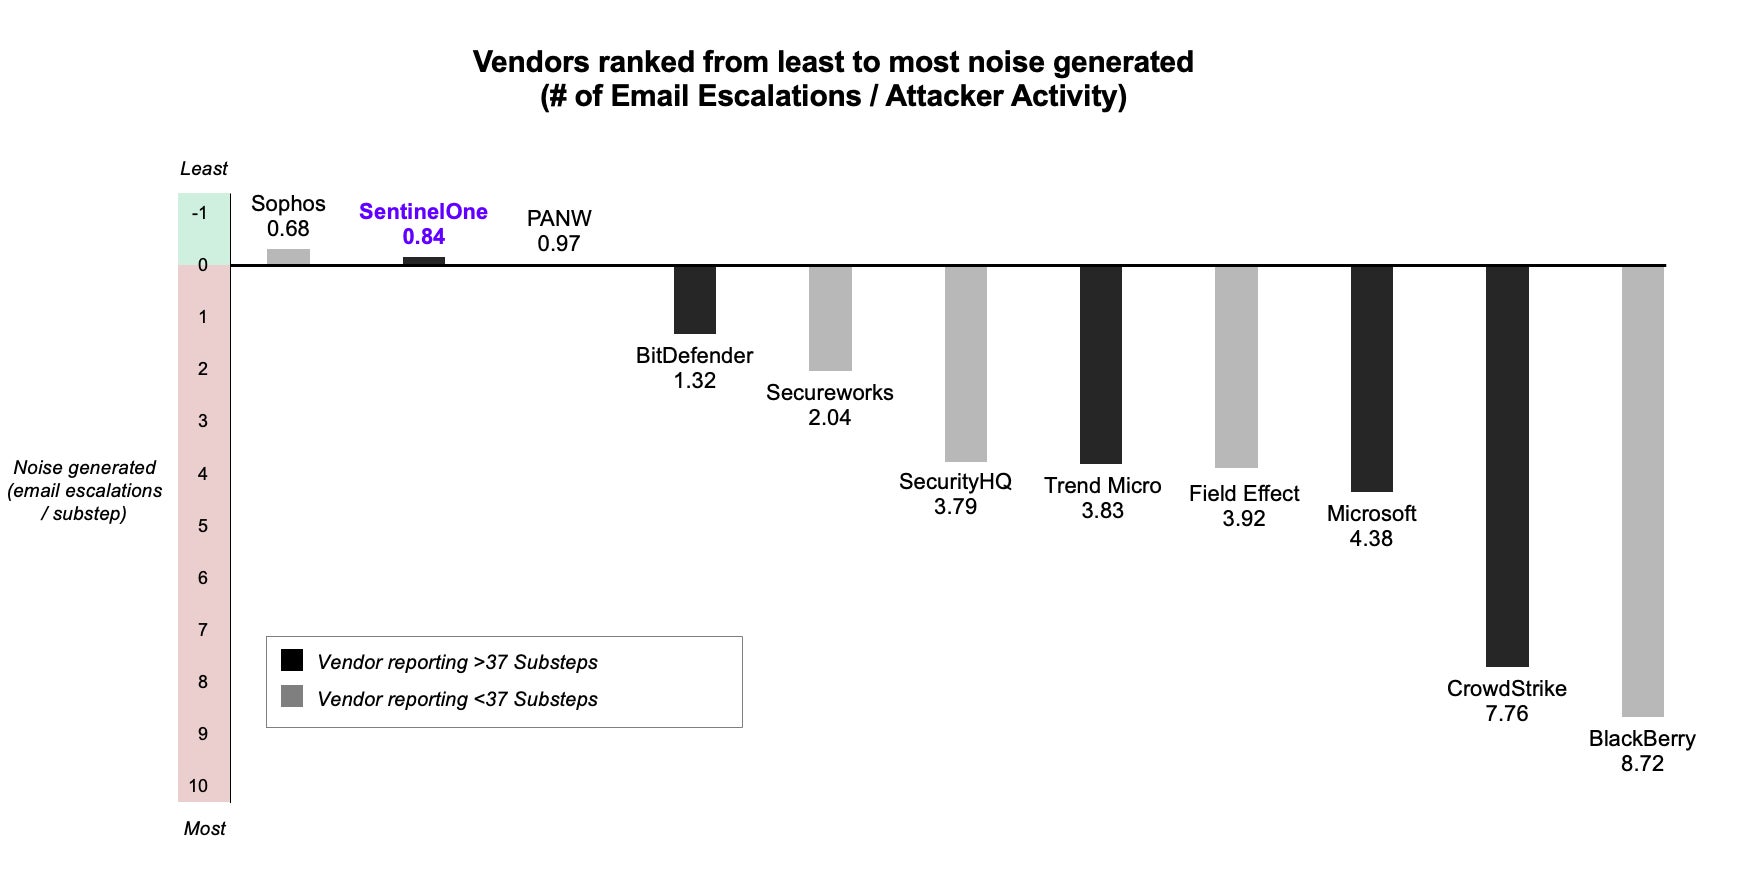 Vendor ranked from least to most noise generated